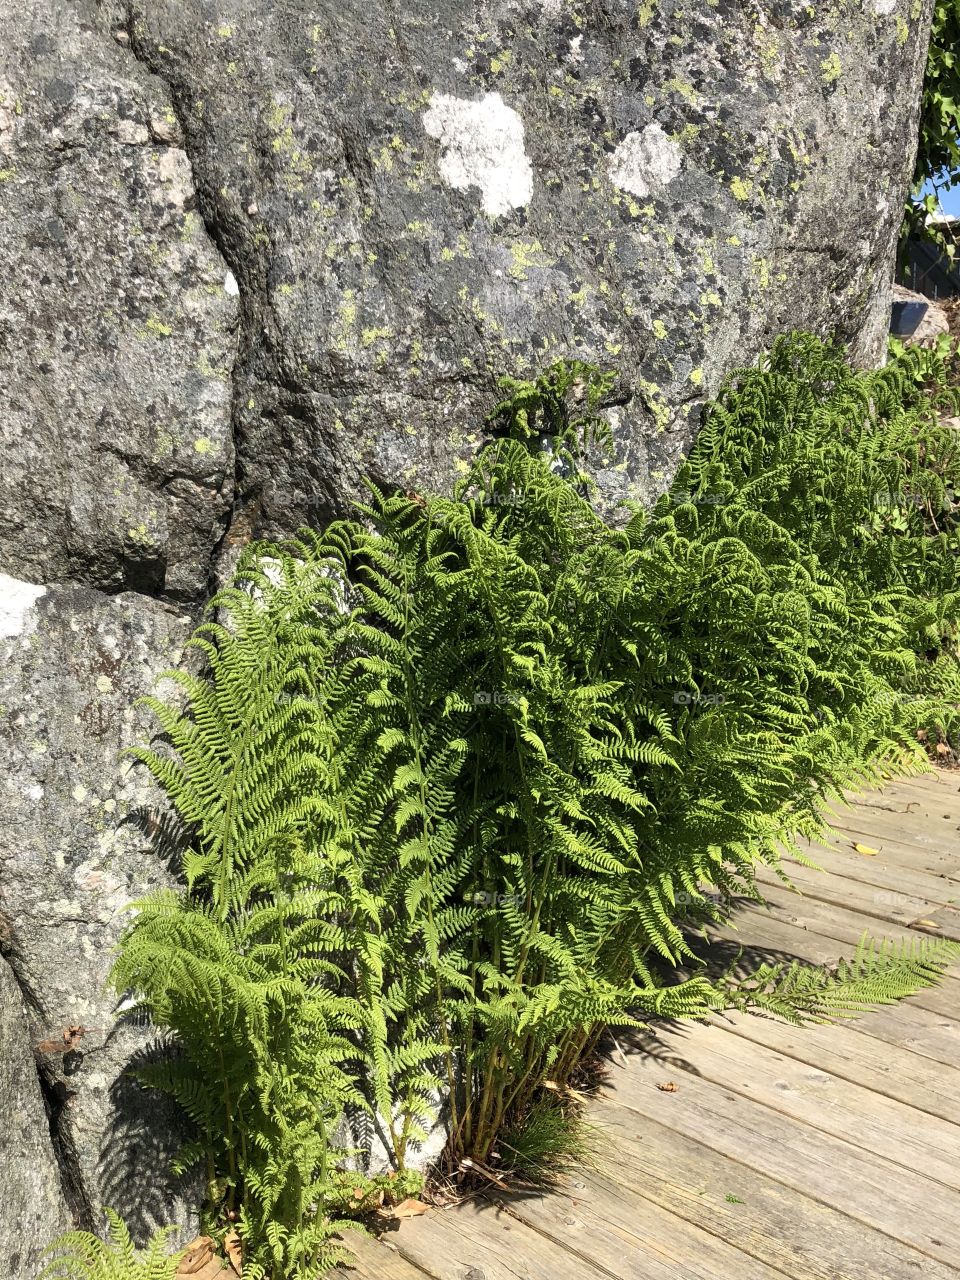 Fern and rocks by the decking